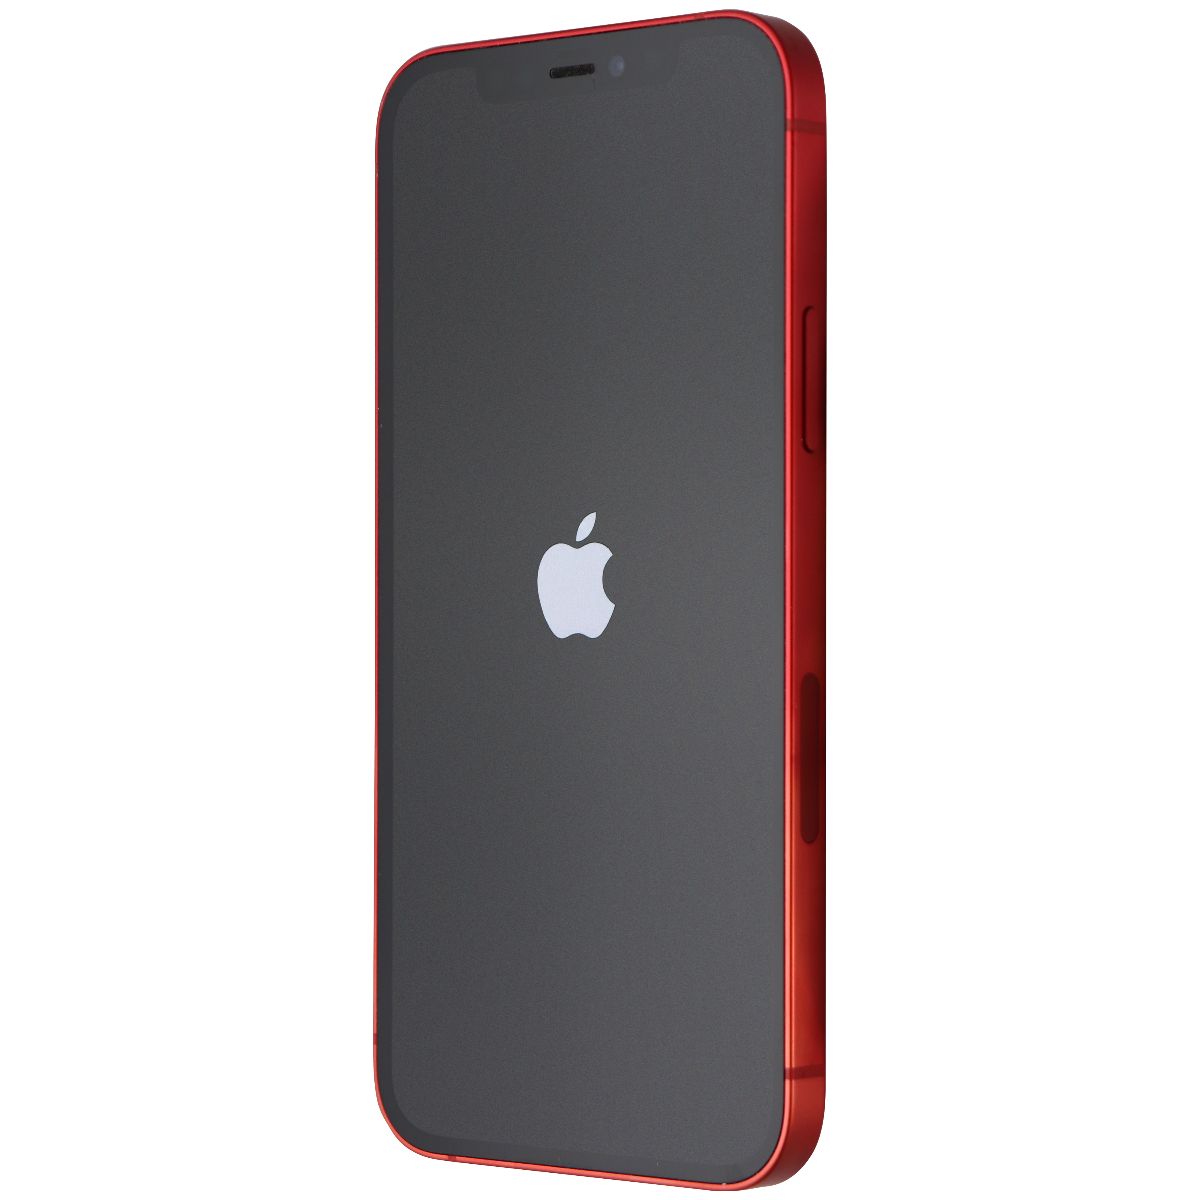 Apple iPhone 12 (6.1-inch) Smartphone (A2403) Unlocked - 128GB / Red Cell Phones & Smartphones Apple    - Simple Cell Bulk Wholesale Pricing - USA Seller